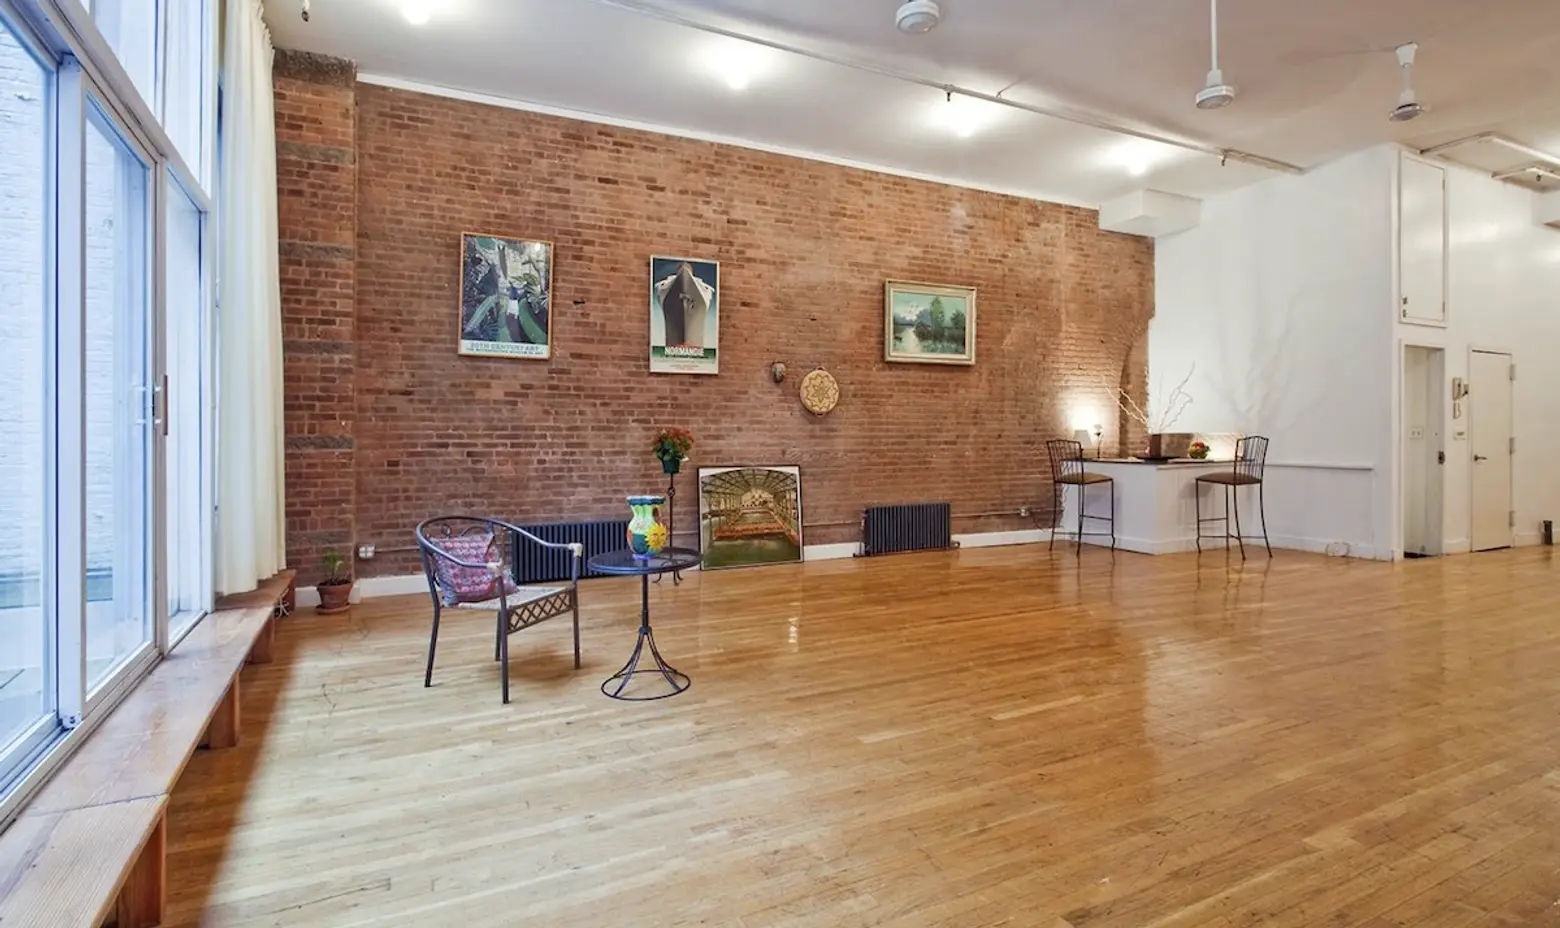 17 Jay Street, Tribeca, live/work loft, commercial space